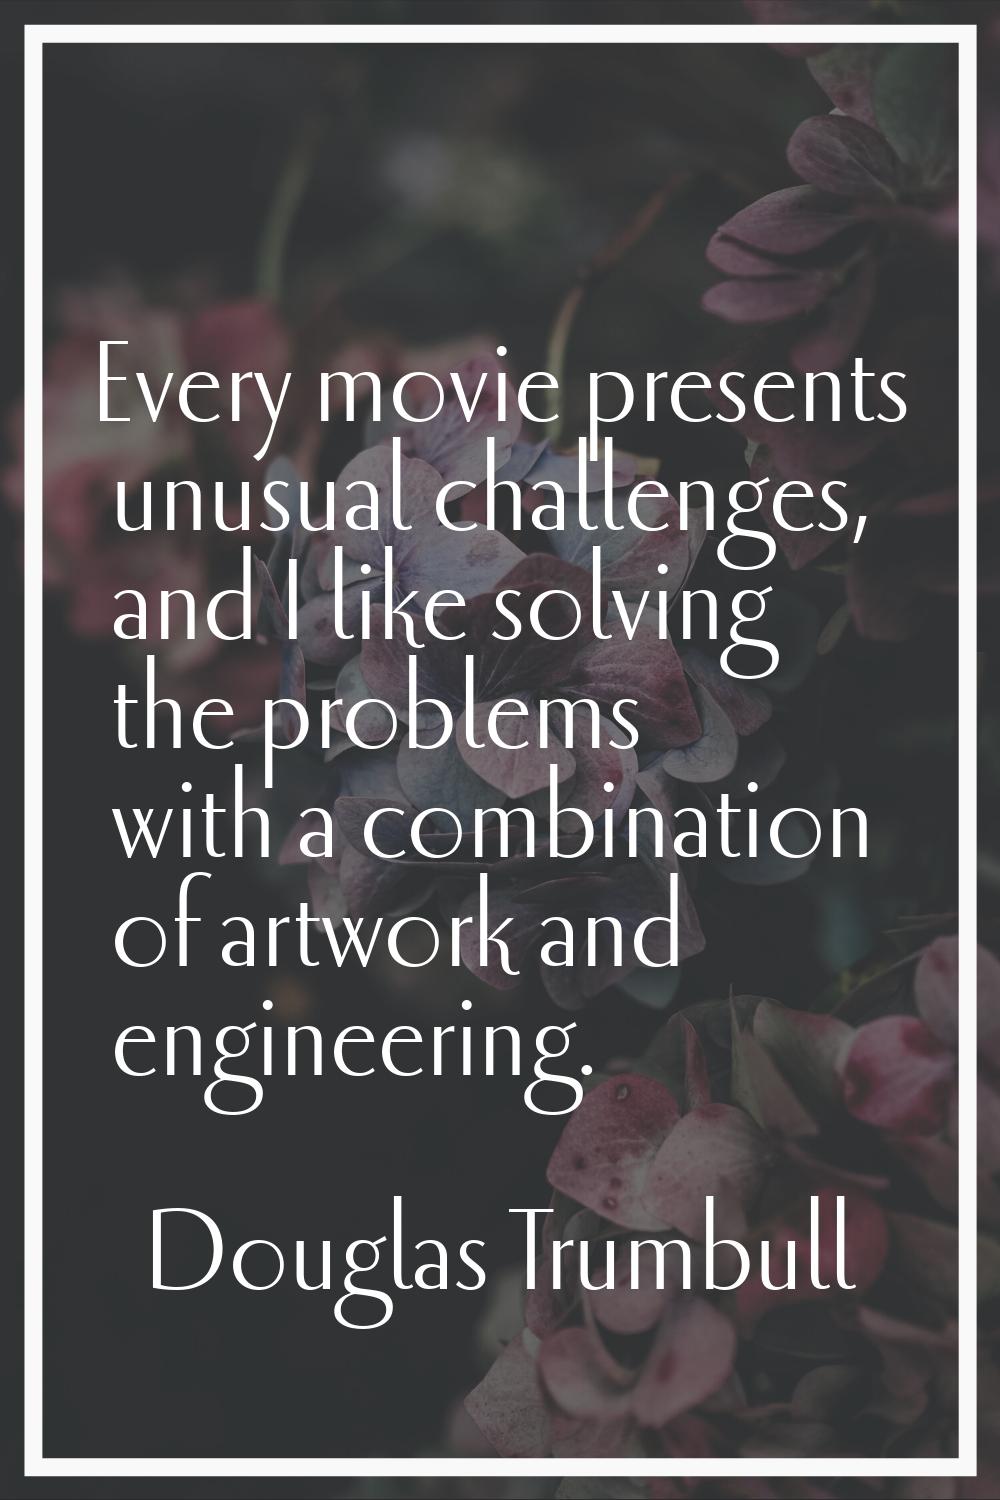 Every movie presents unusual challenges, and I like solving the problems with a combination of artw